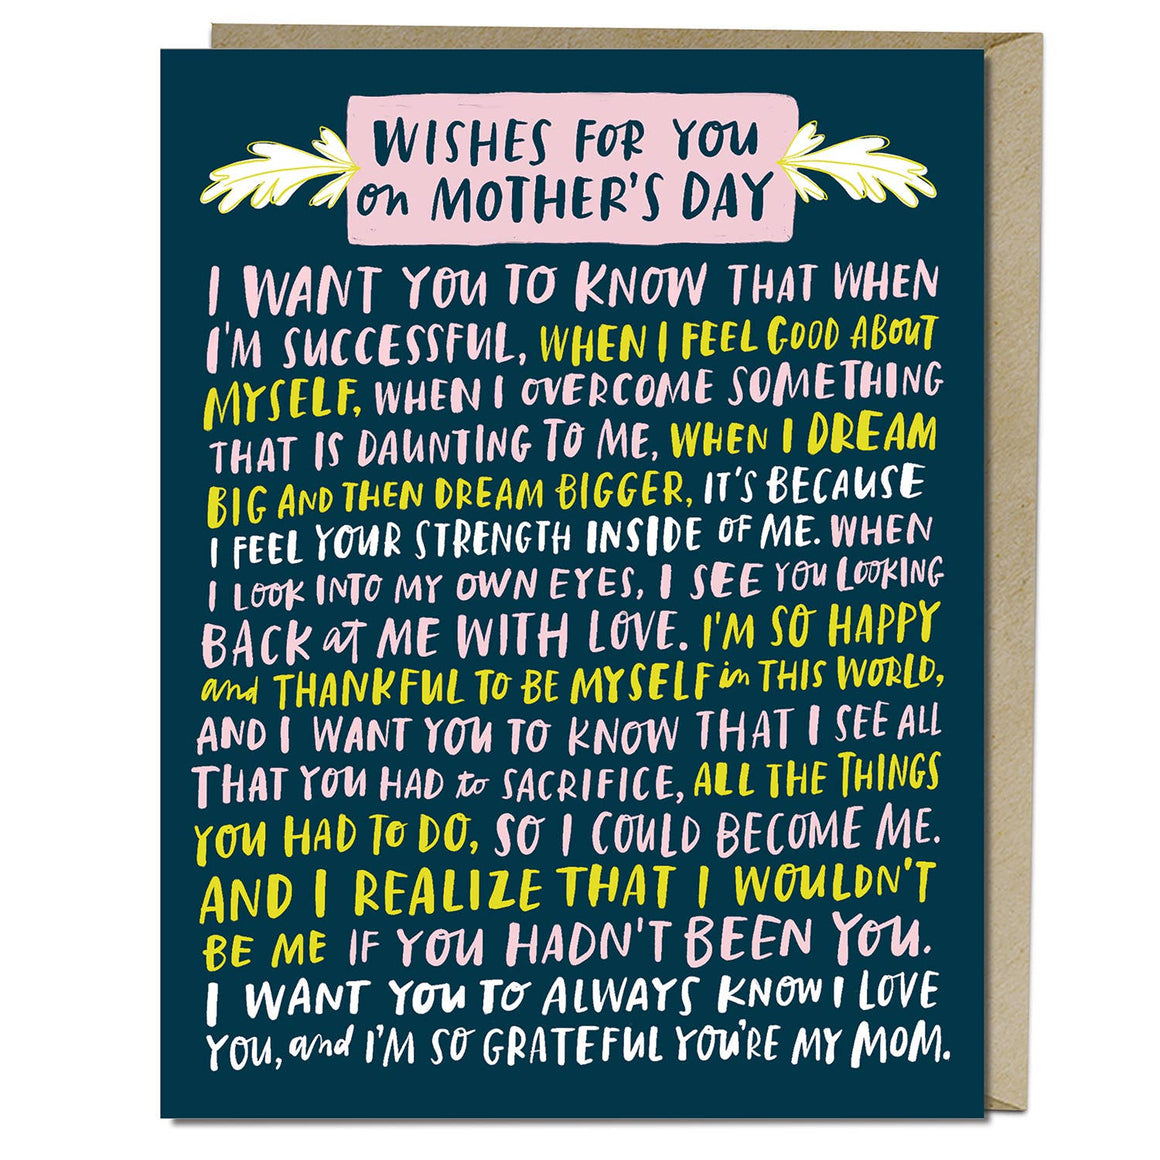 Wishes For You - Mother's Day Card